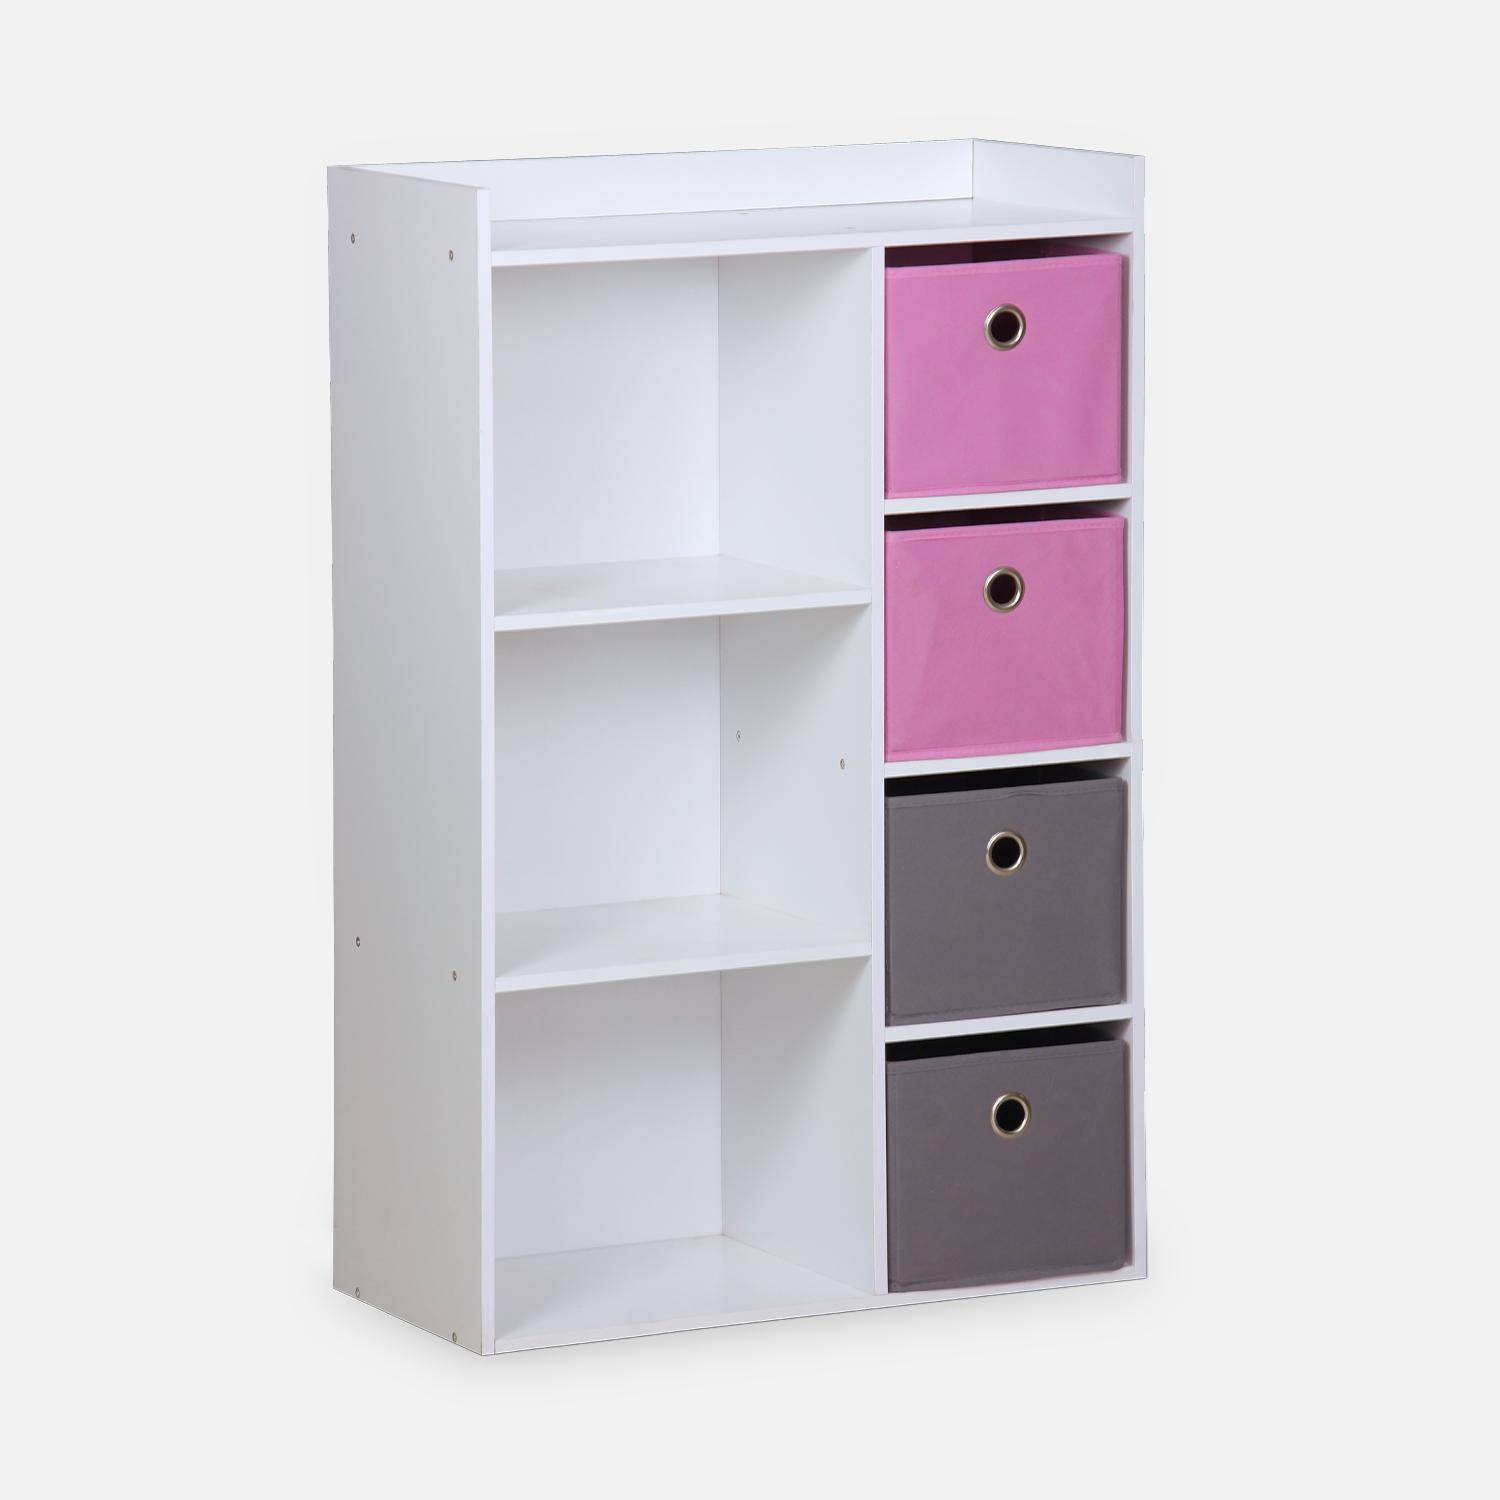 Storage unit for kids, white - Camille - with 7 compartments and 4 baskets in grey and pink Photo3